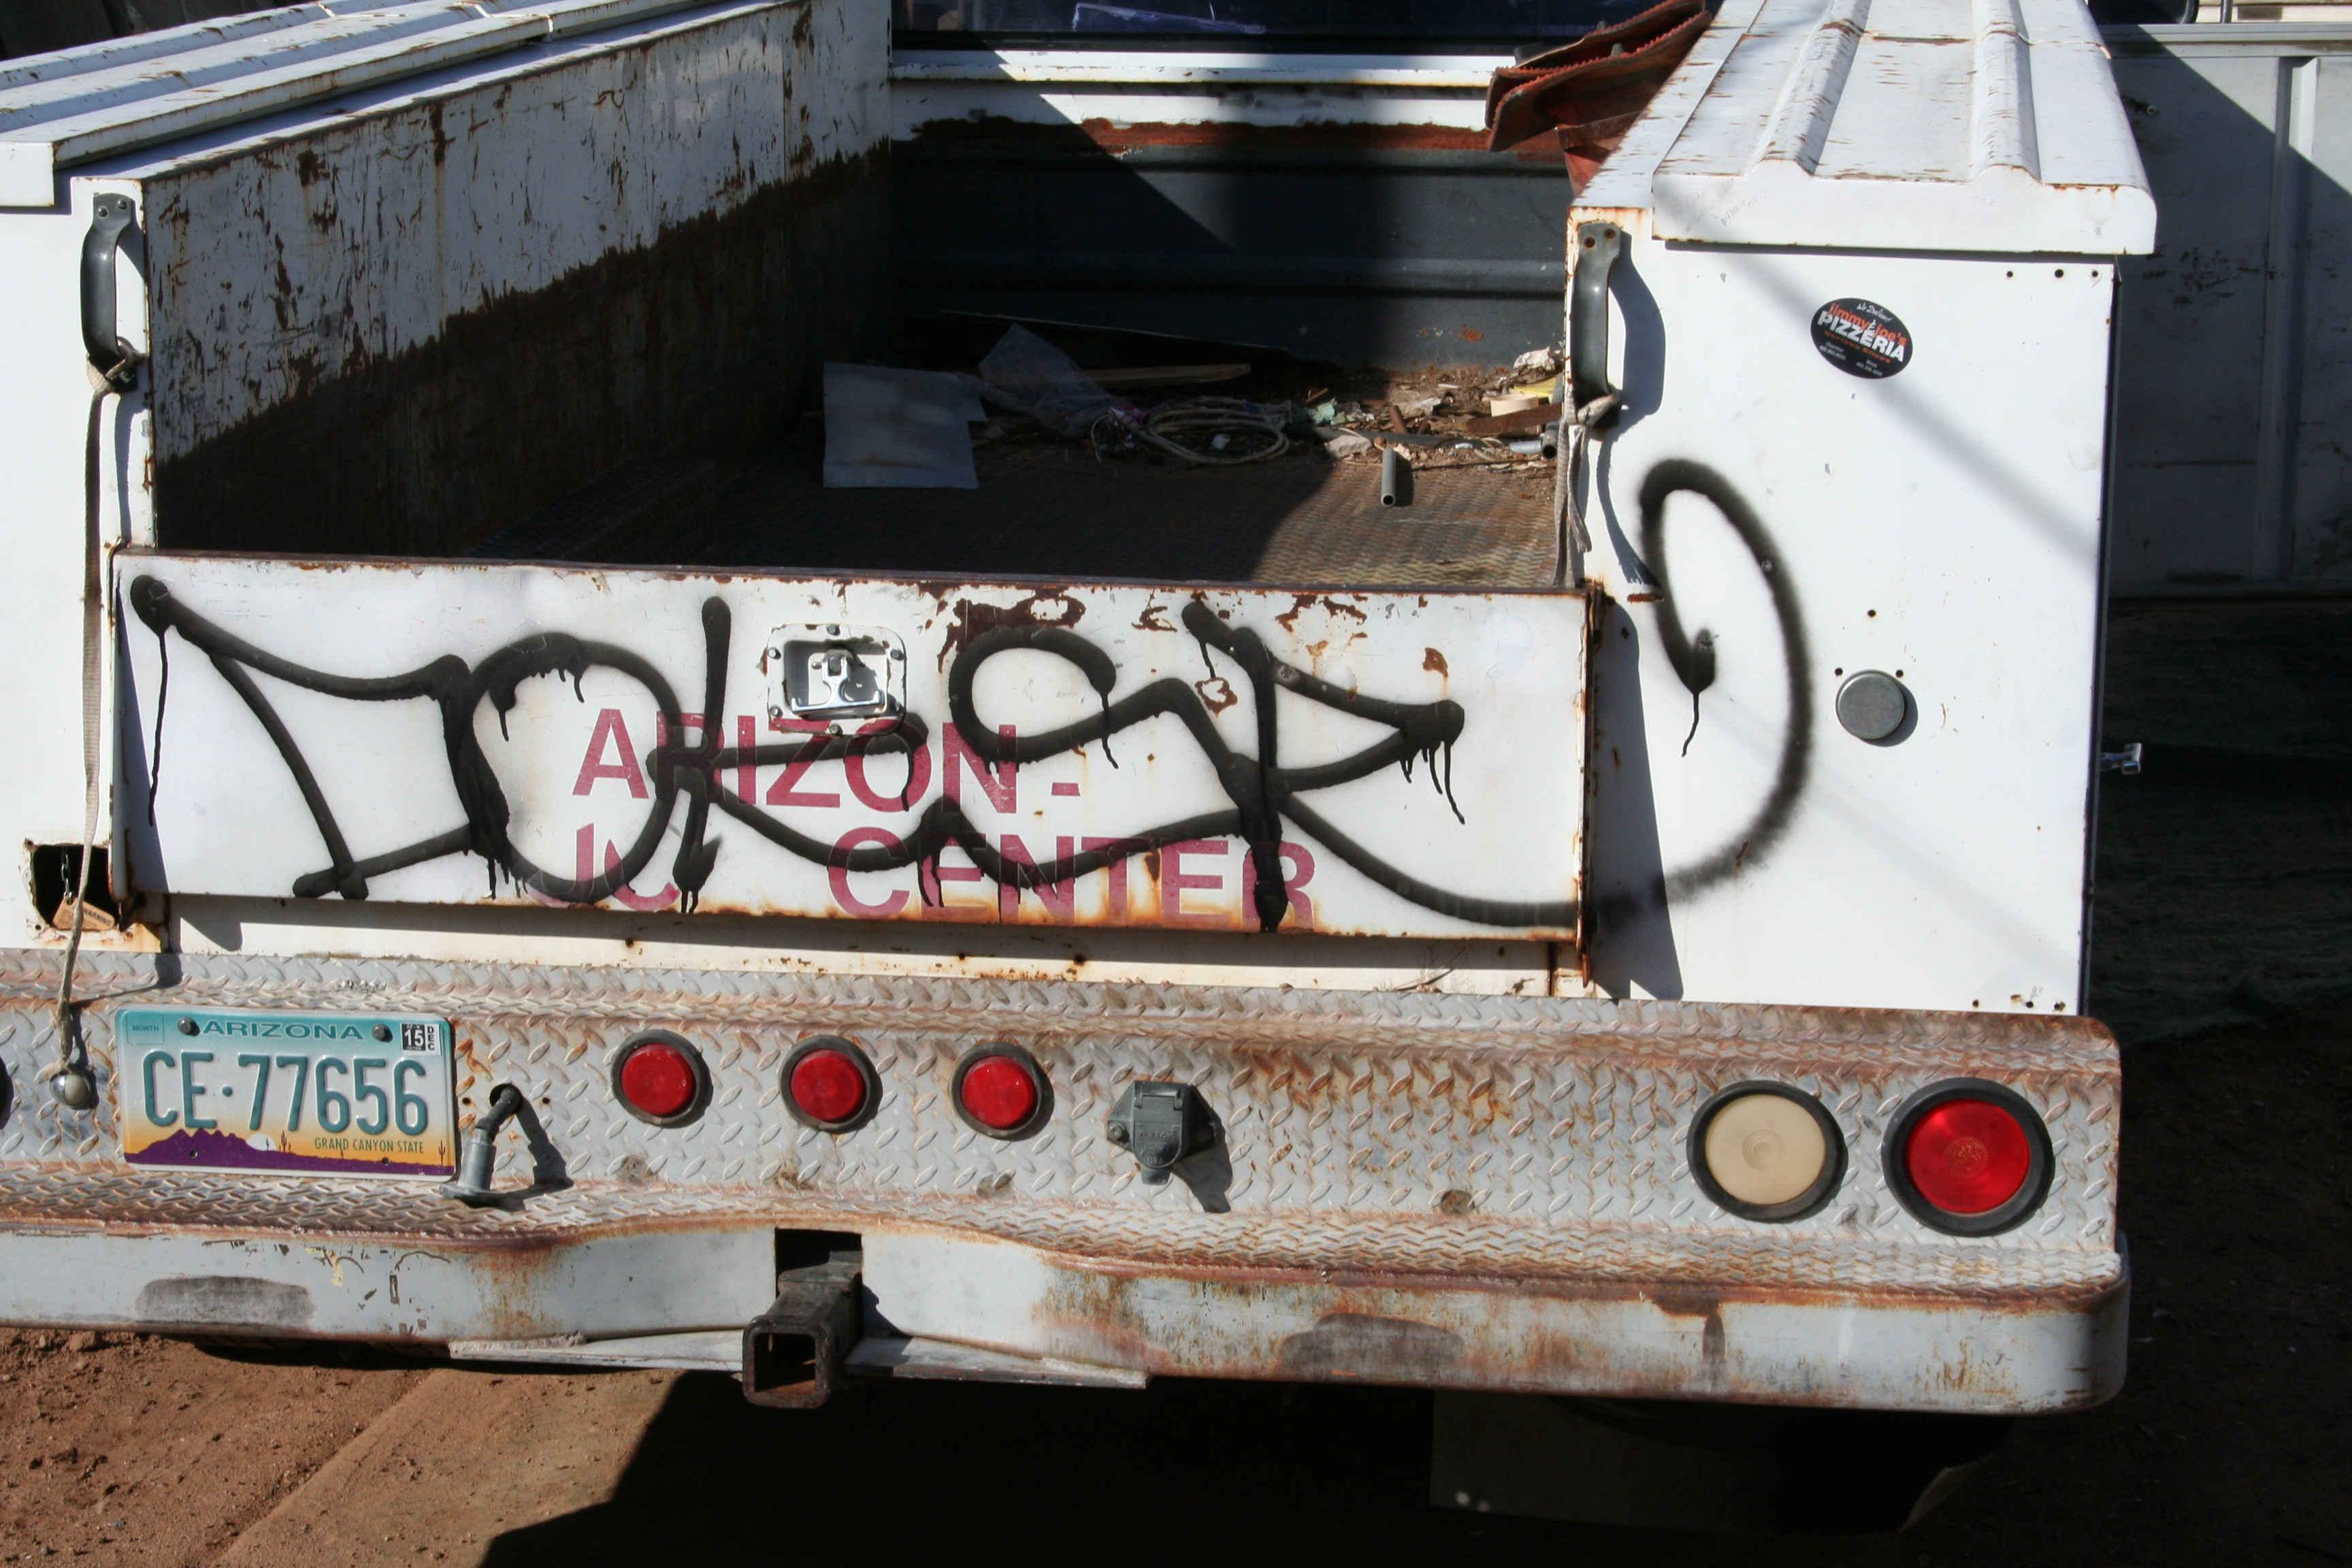 Truck left out on street and was Graffiti'd